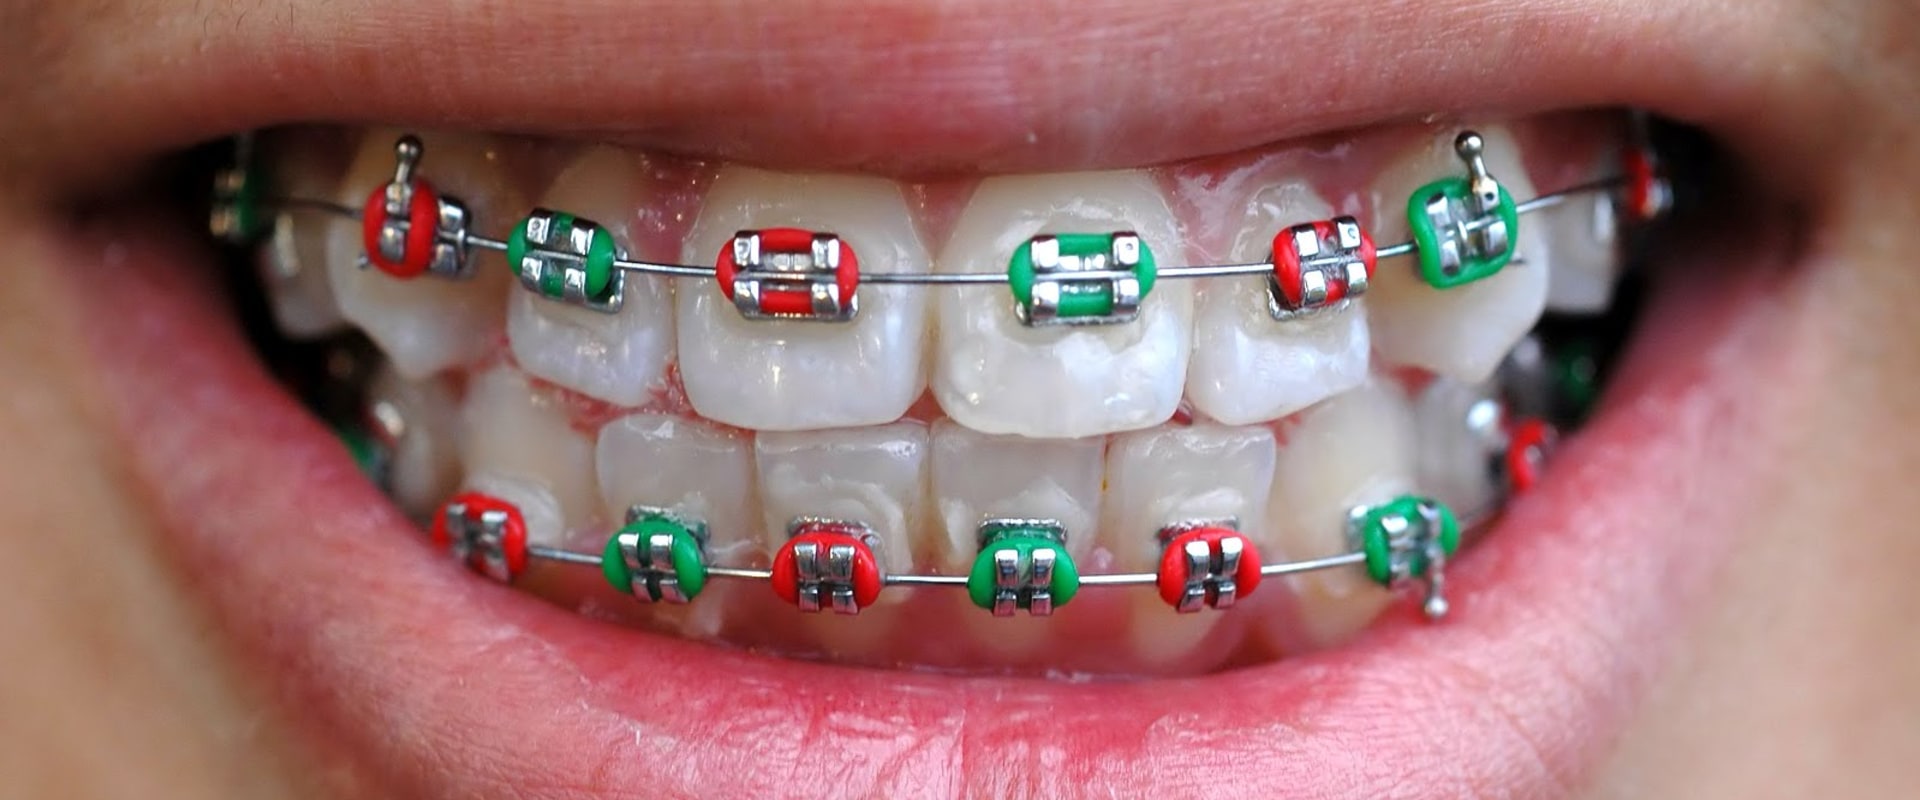 What Types of Materials are Used for Braces in the UK?